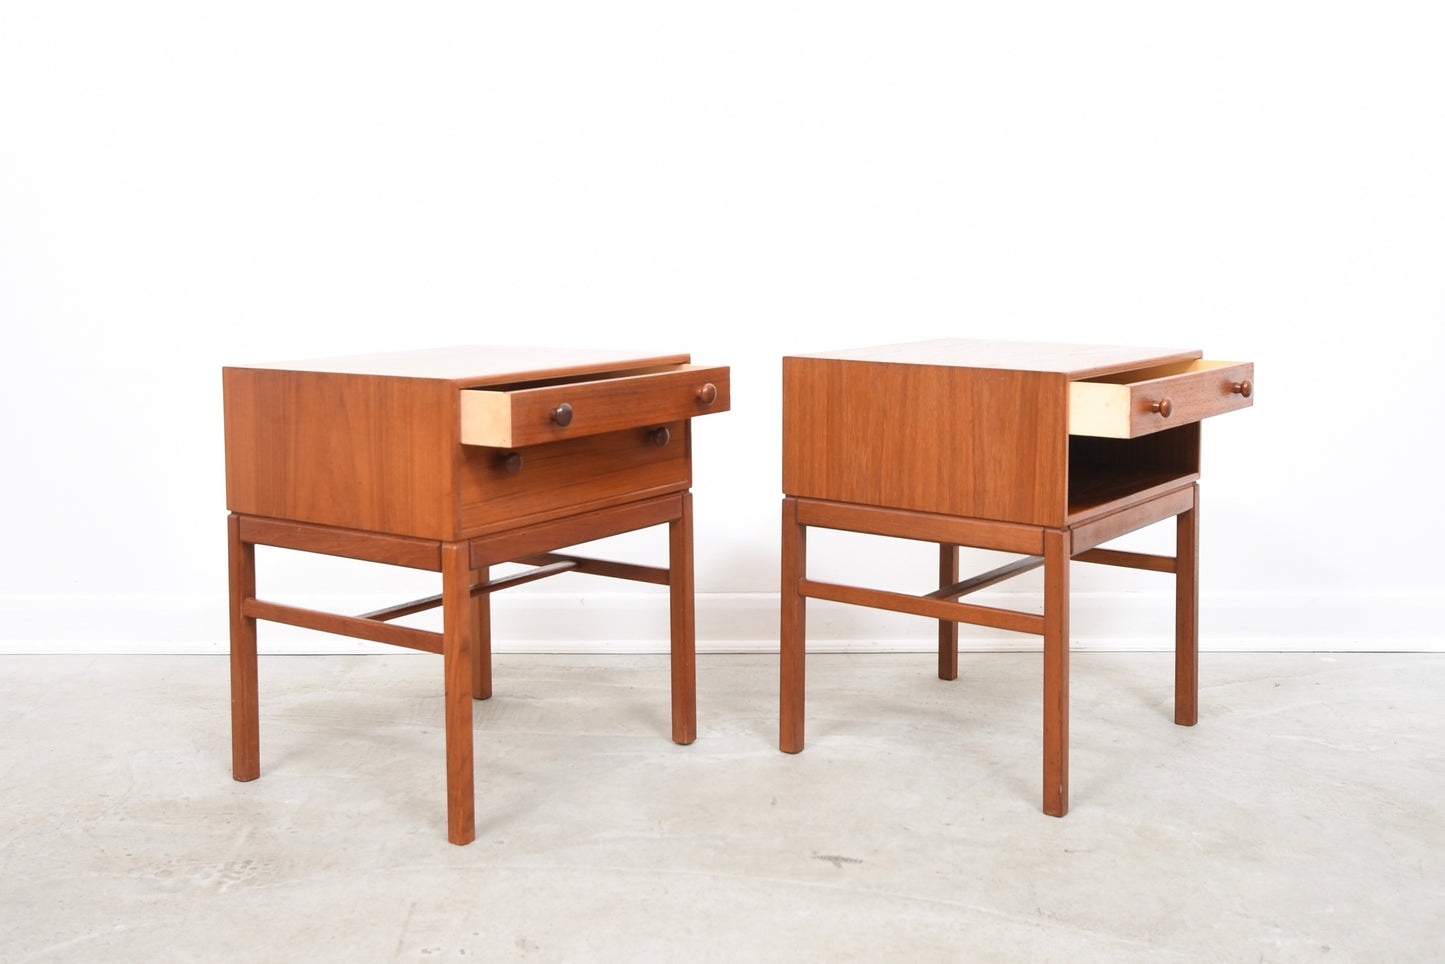 Pair of bedside tables by Tingströms